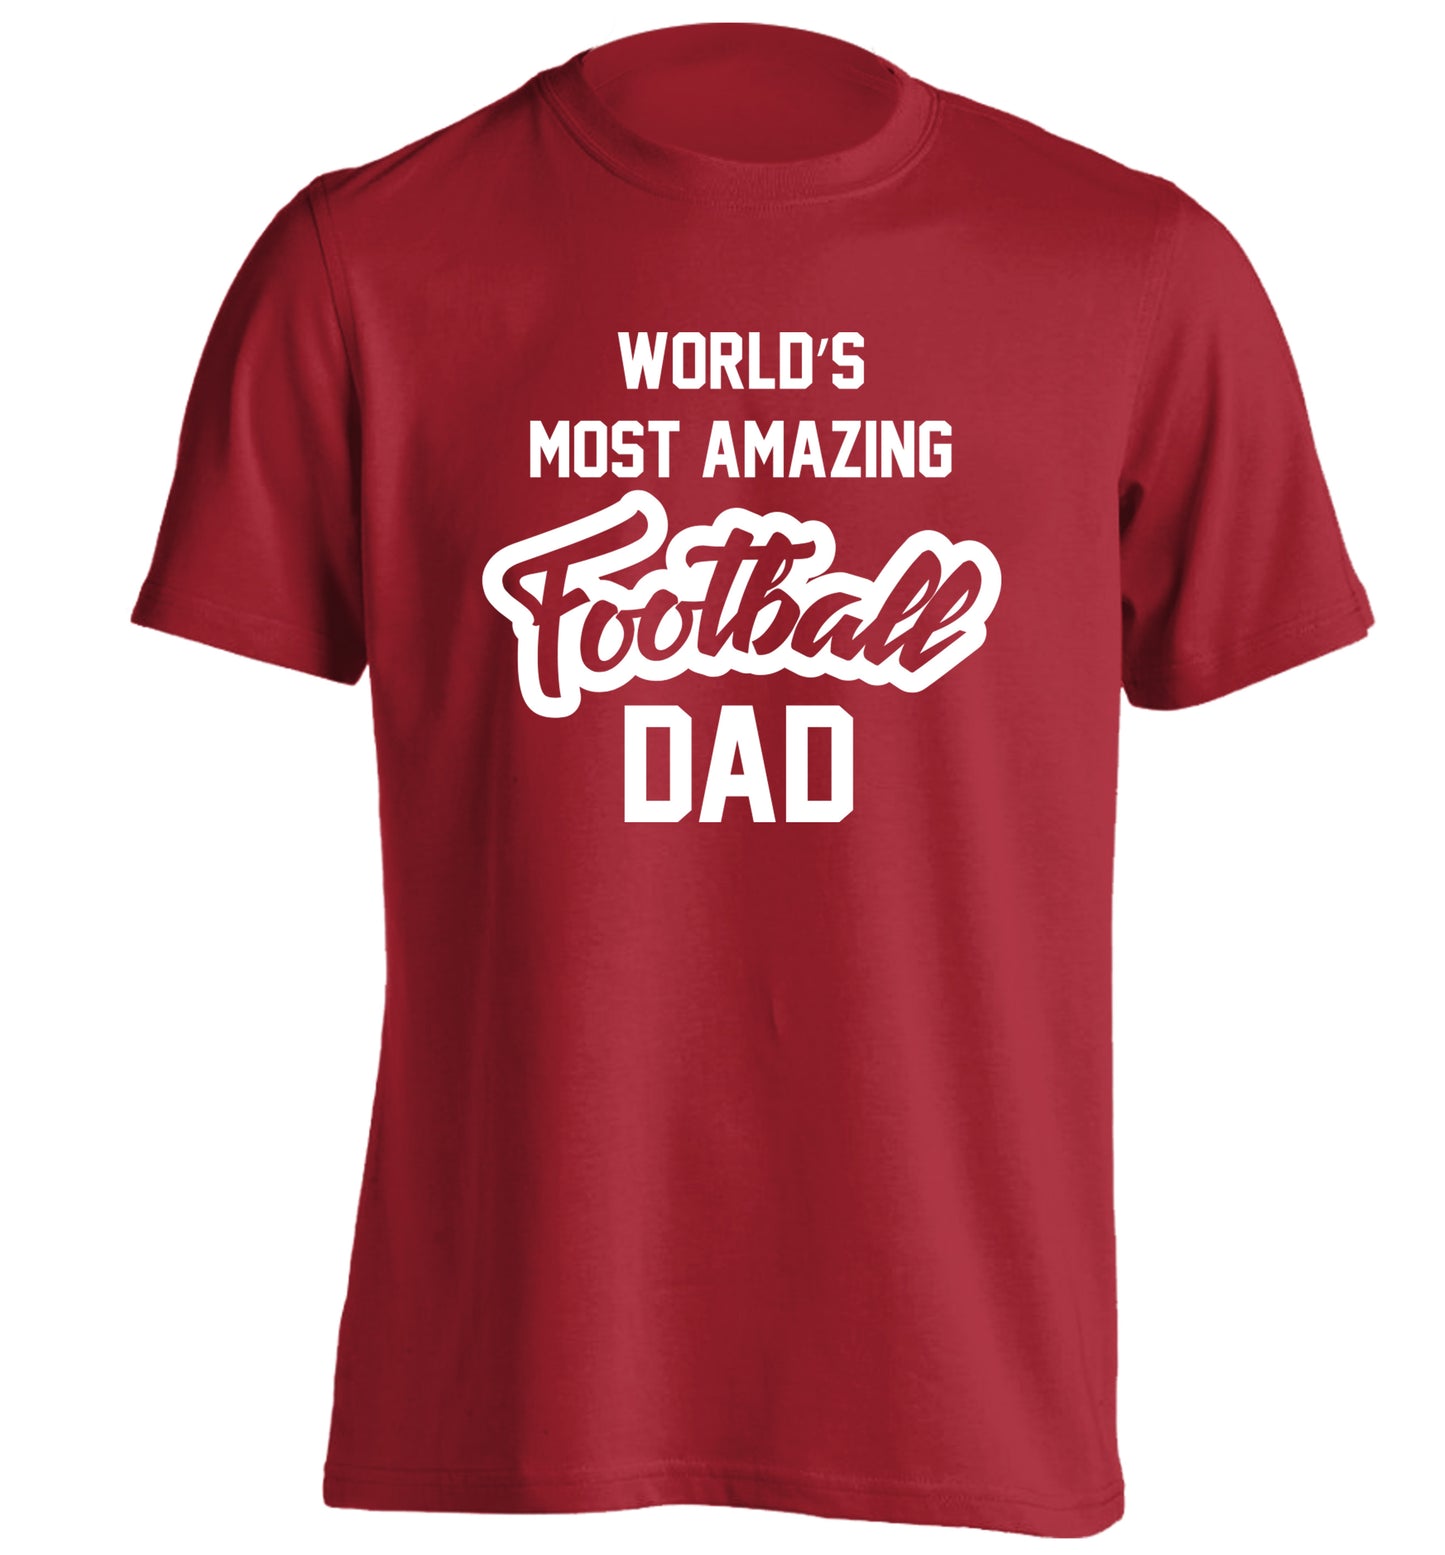 Worlds most amazing football dad adults unisexred Tshirt 2XL